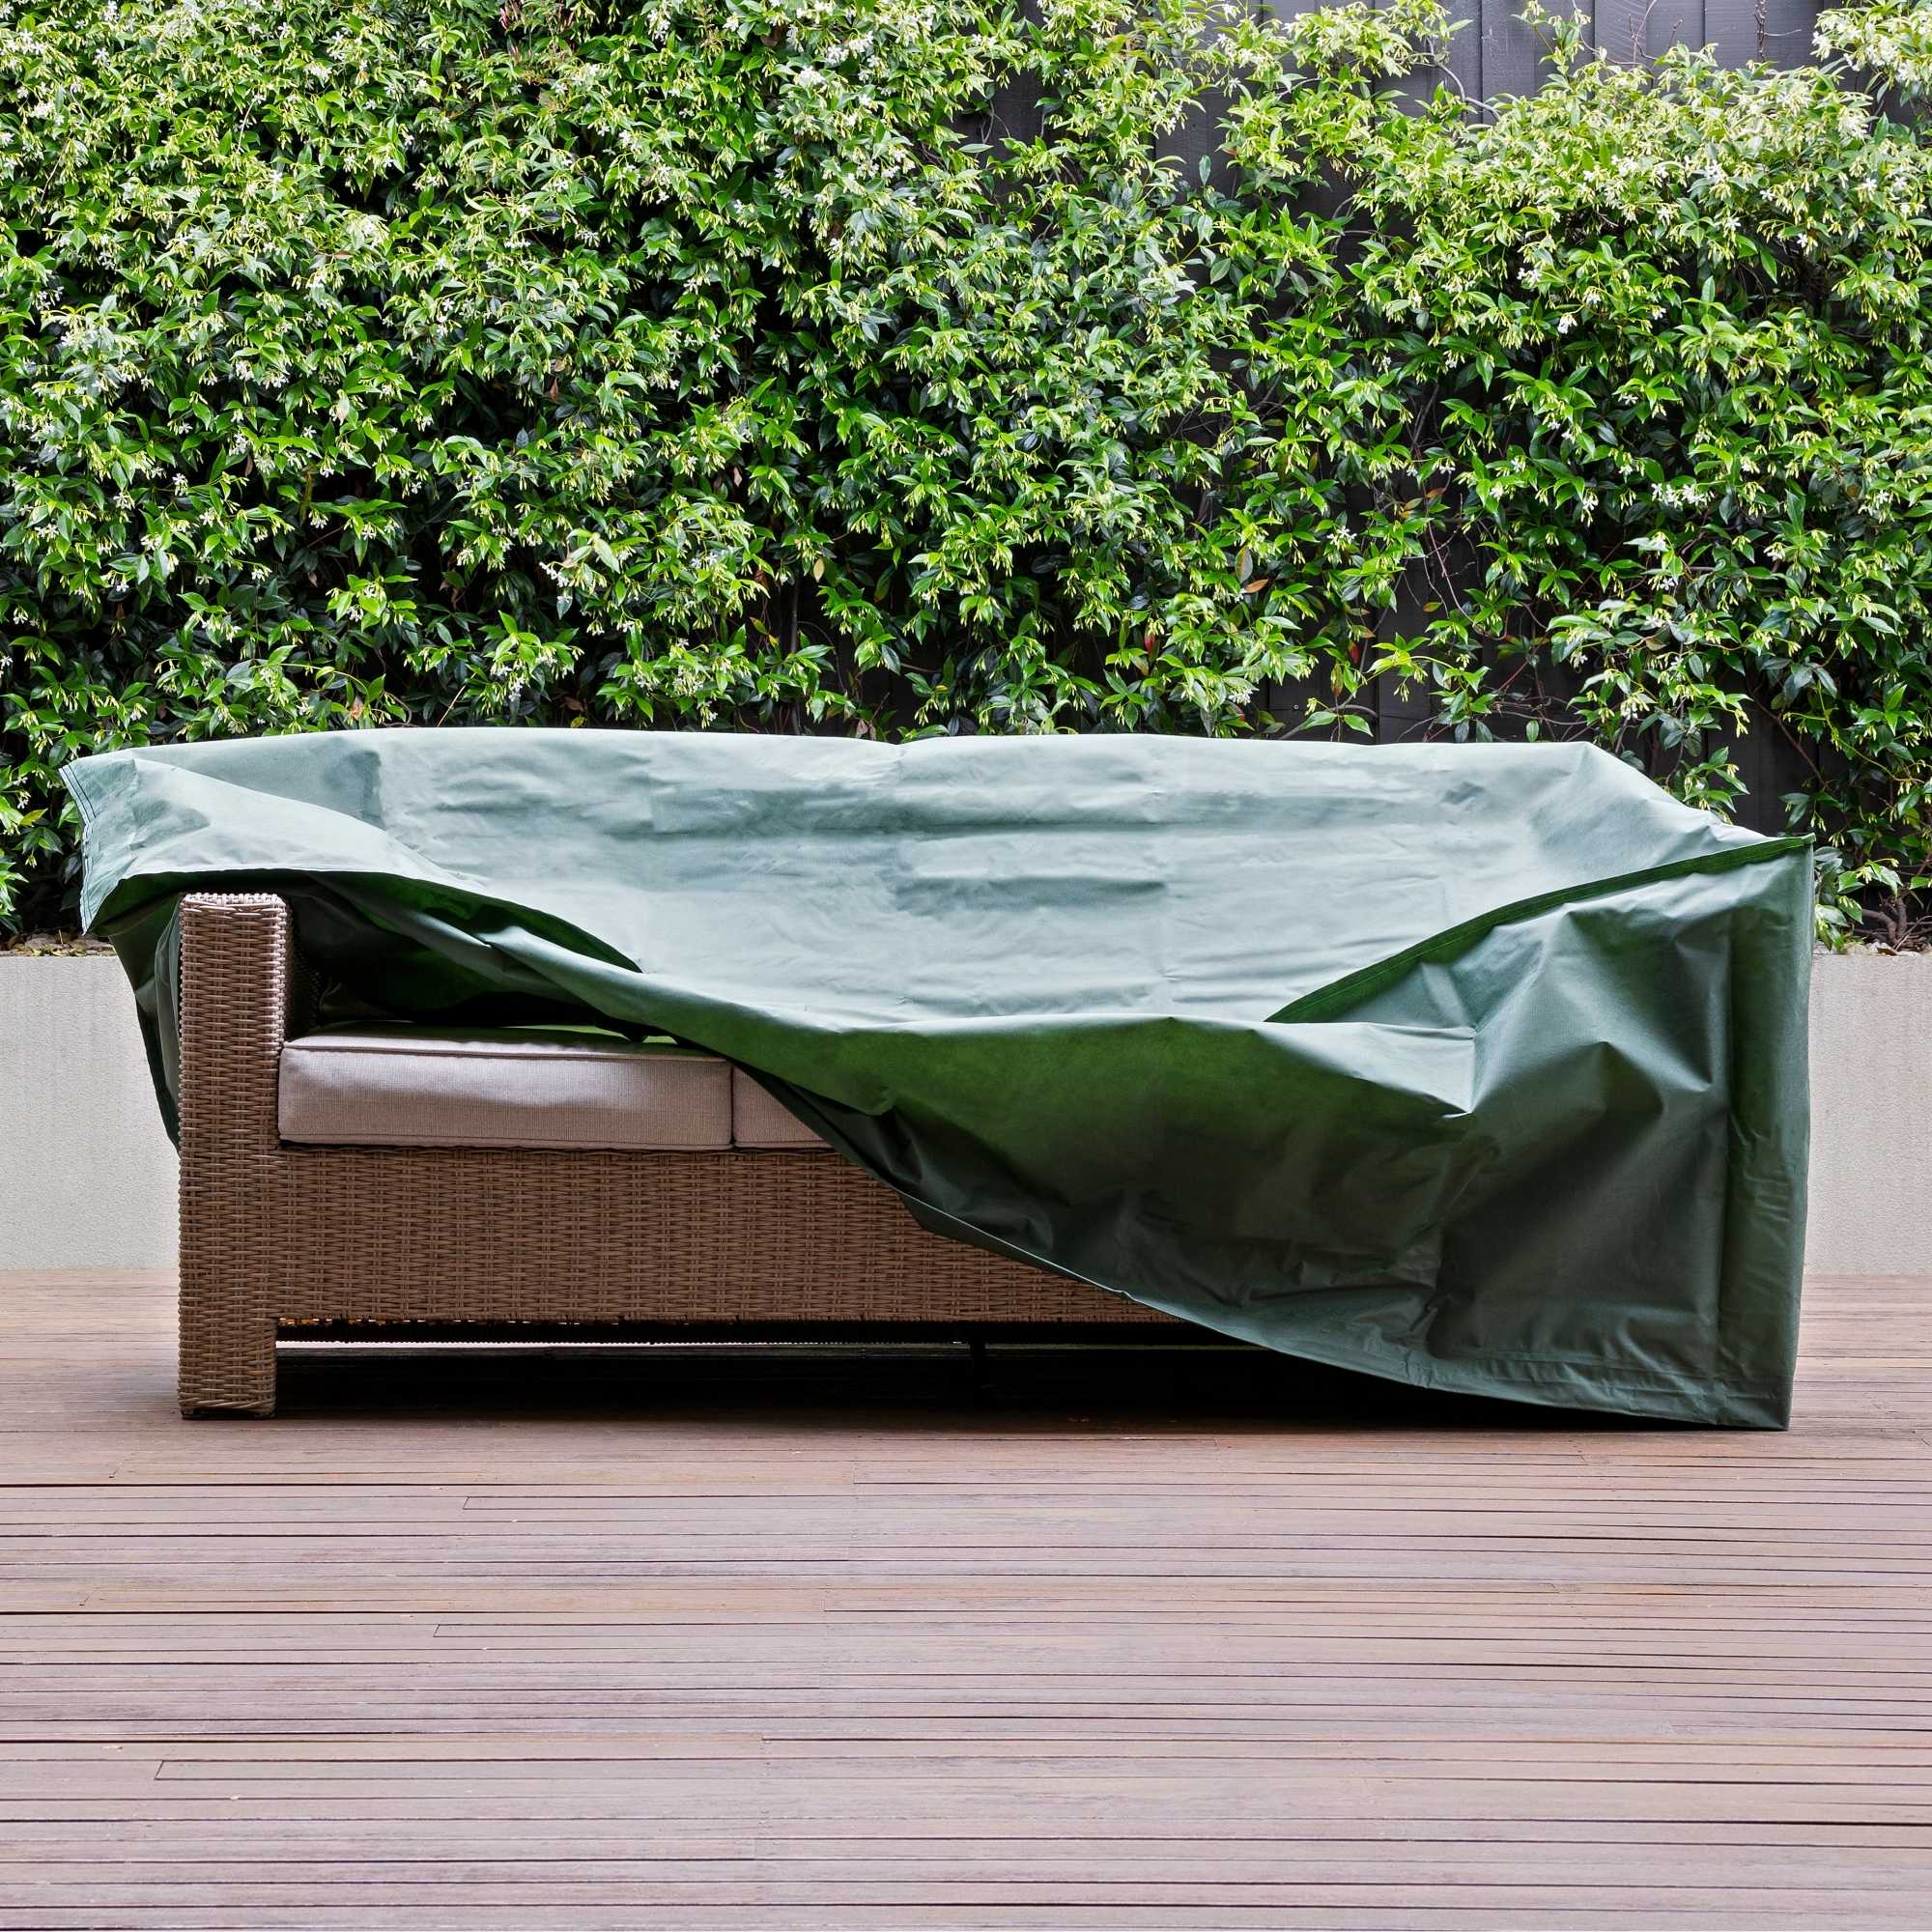 Outdoor 3 Seater Sofa Cover Protect, Frontline Outdoor Furniture Covers